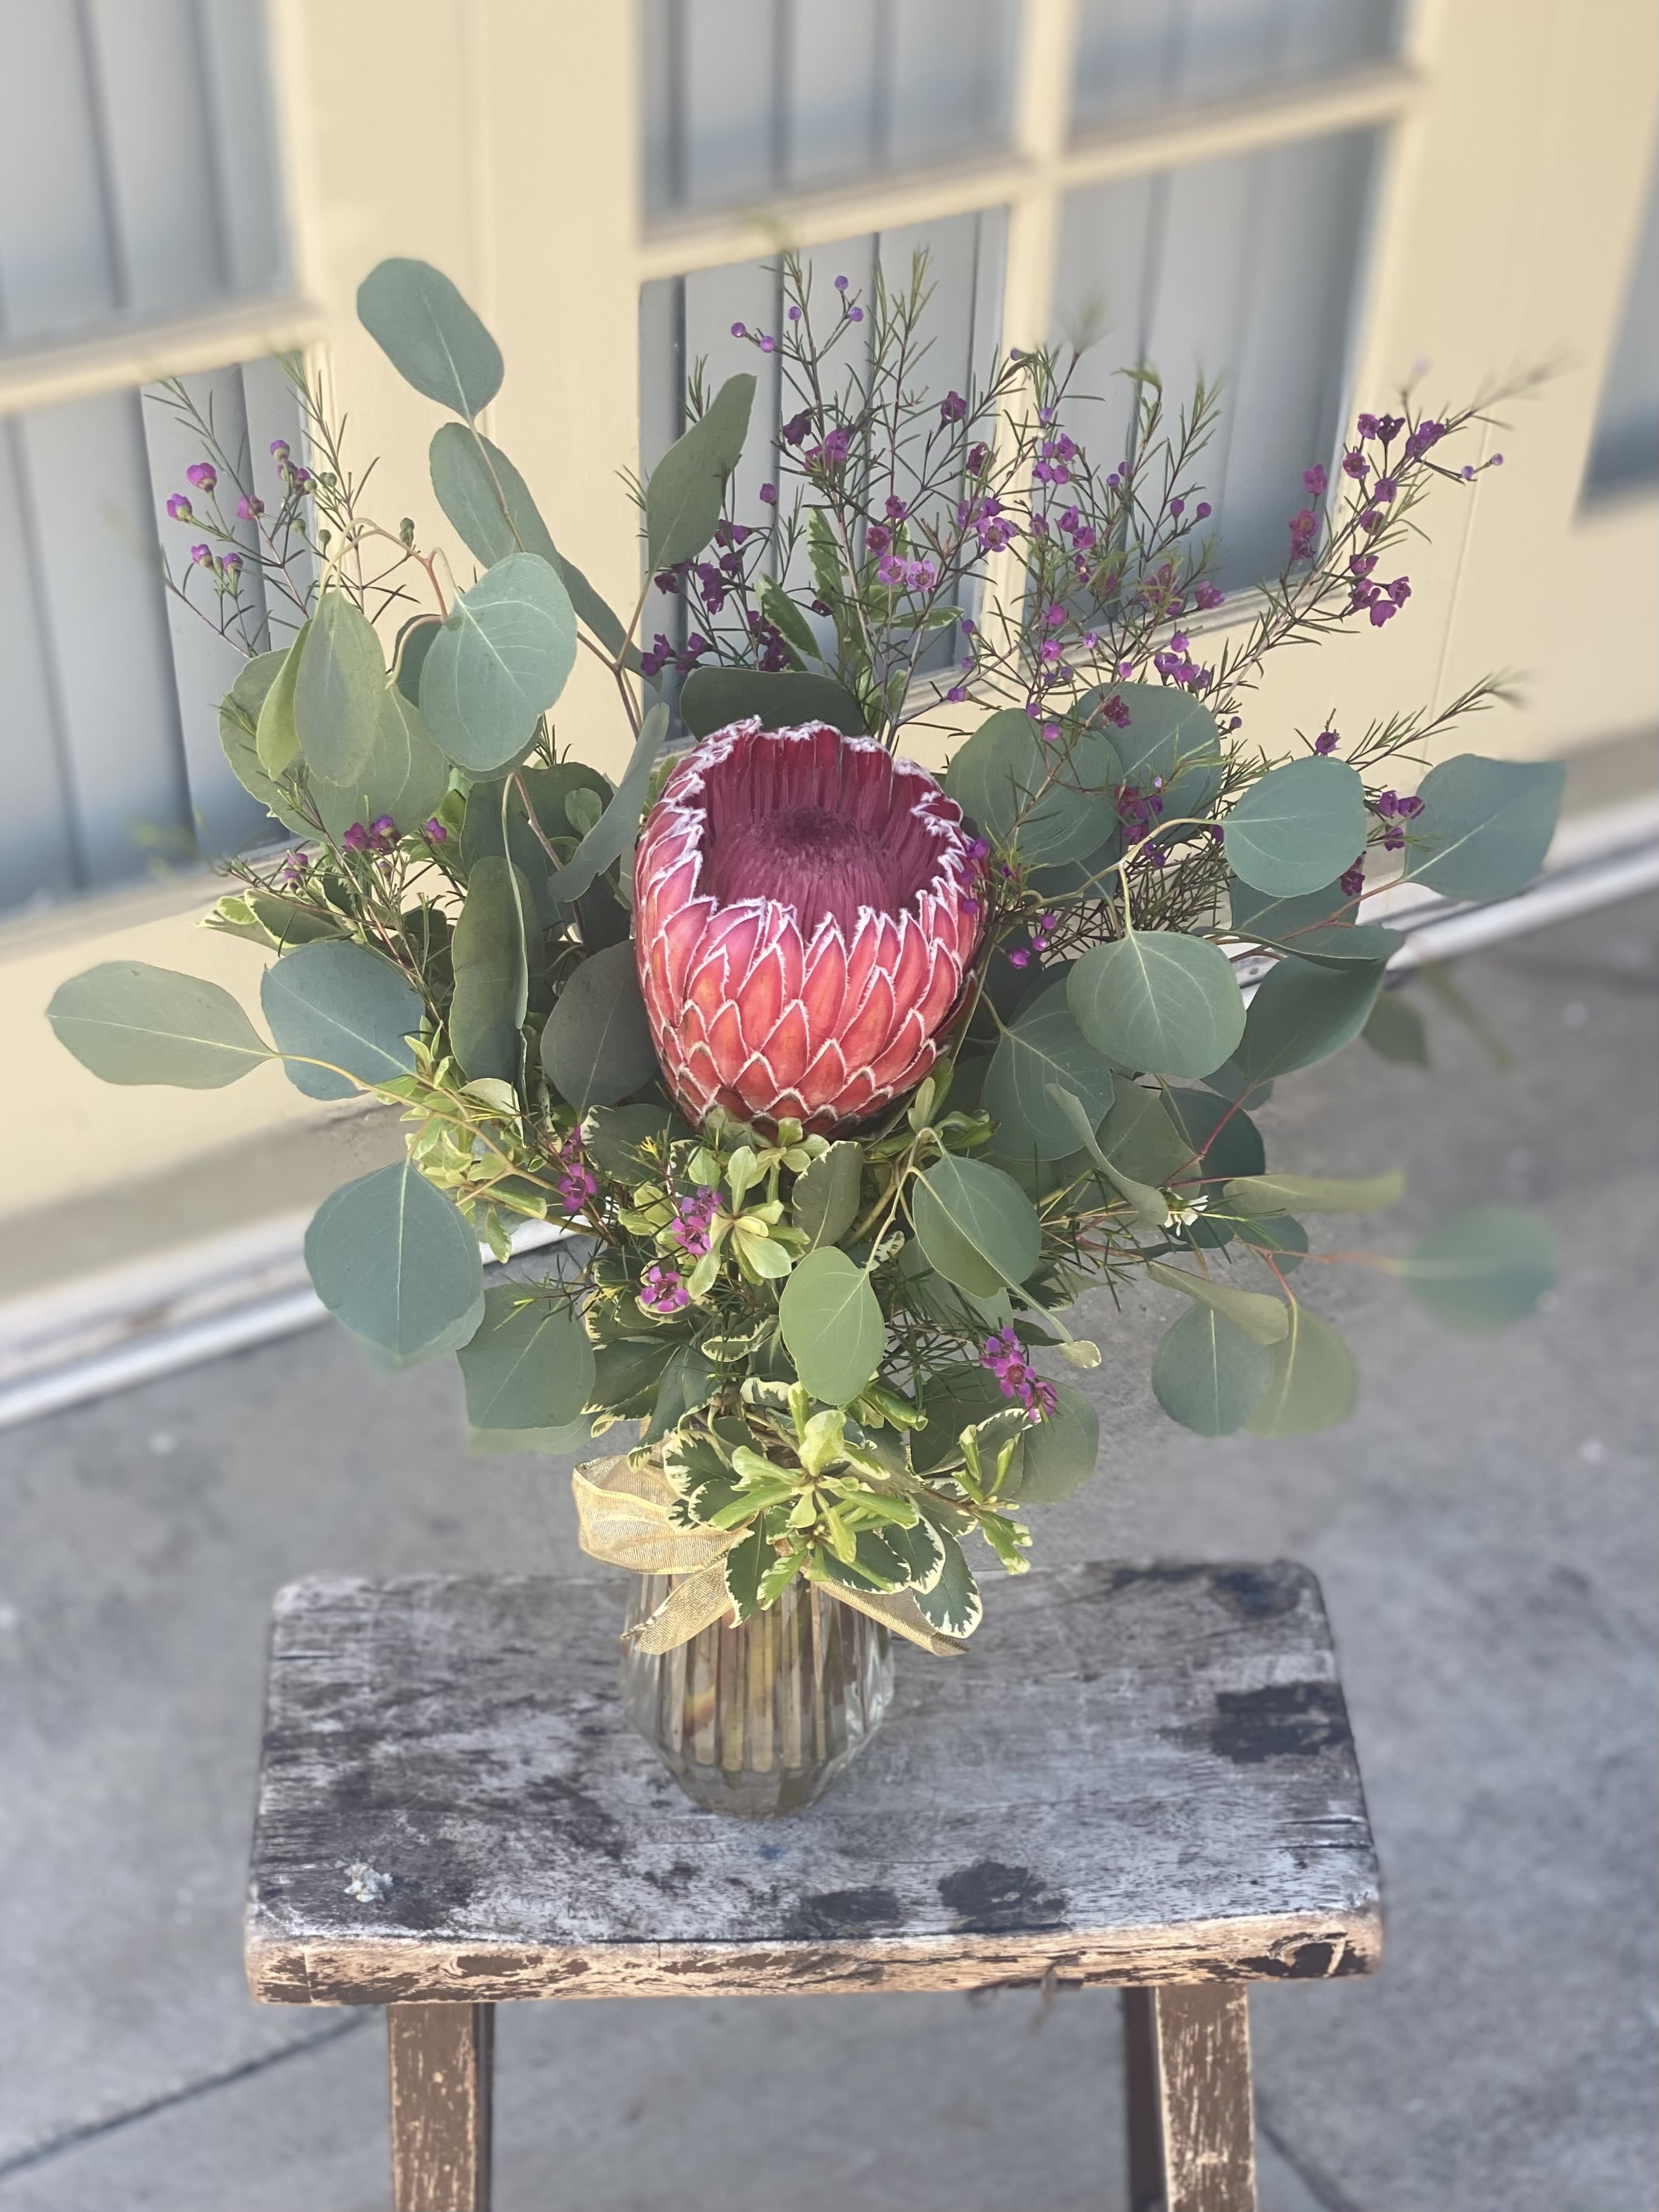 Queen Protea Bouquet  - Queen Protea is a flower that looks like the petals of queen’s crown in pink wonder and is very soft in the center. Perfect gift for those Protea exotic lovers or any special occasion. 